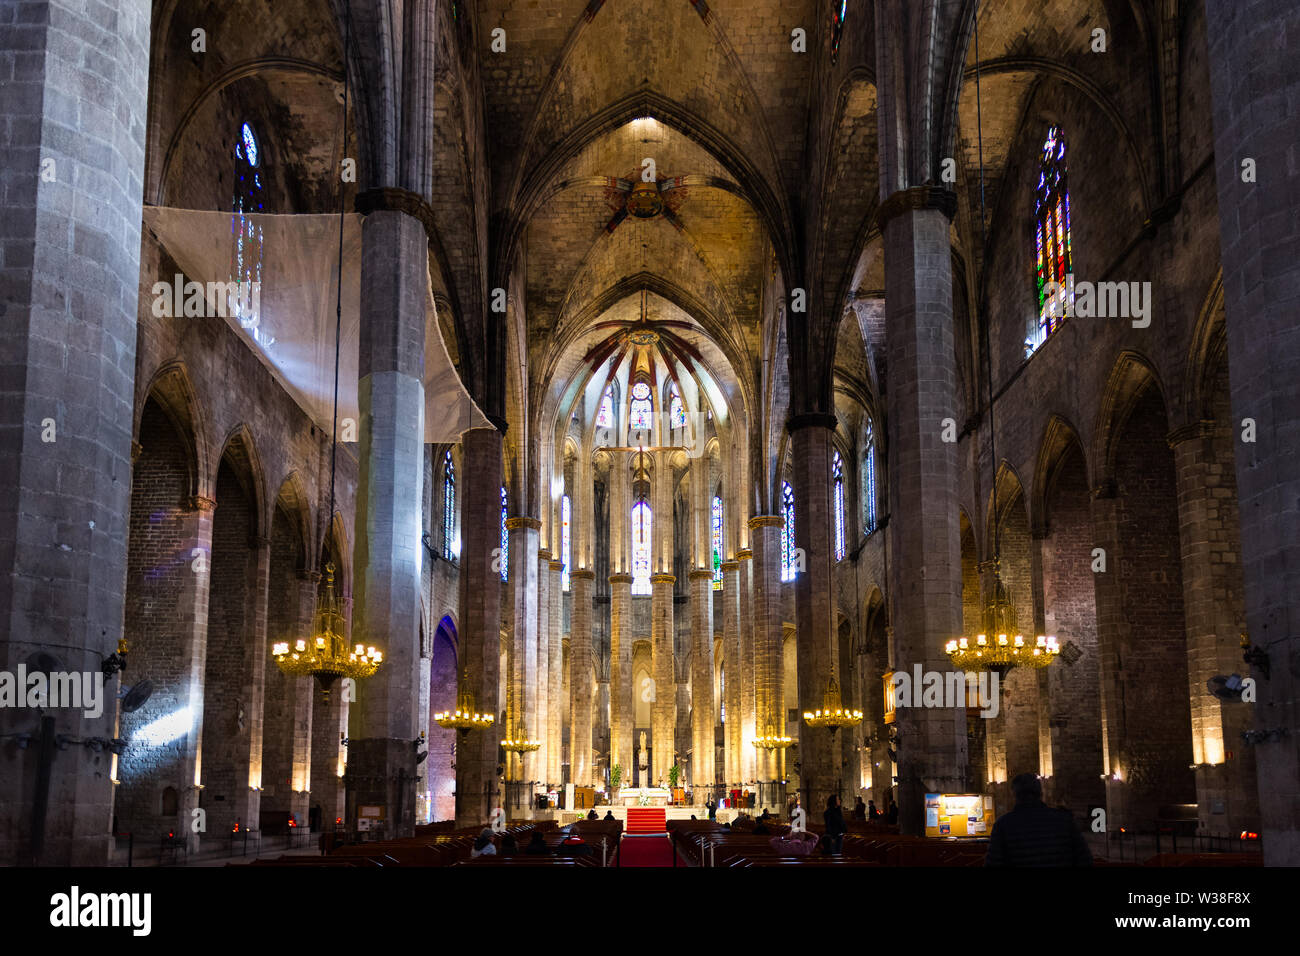 Interior of Santa Maria del Mar Basilica in typical Catalan Gothic style with pointed arches and high columns. La Ribera, Barcelona. Spain. Stock Photo